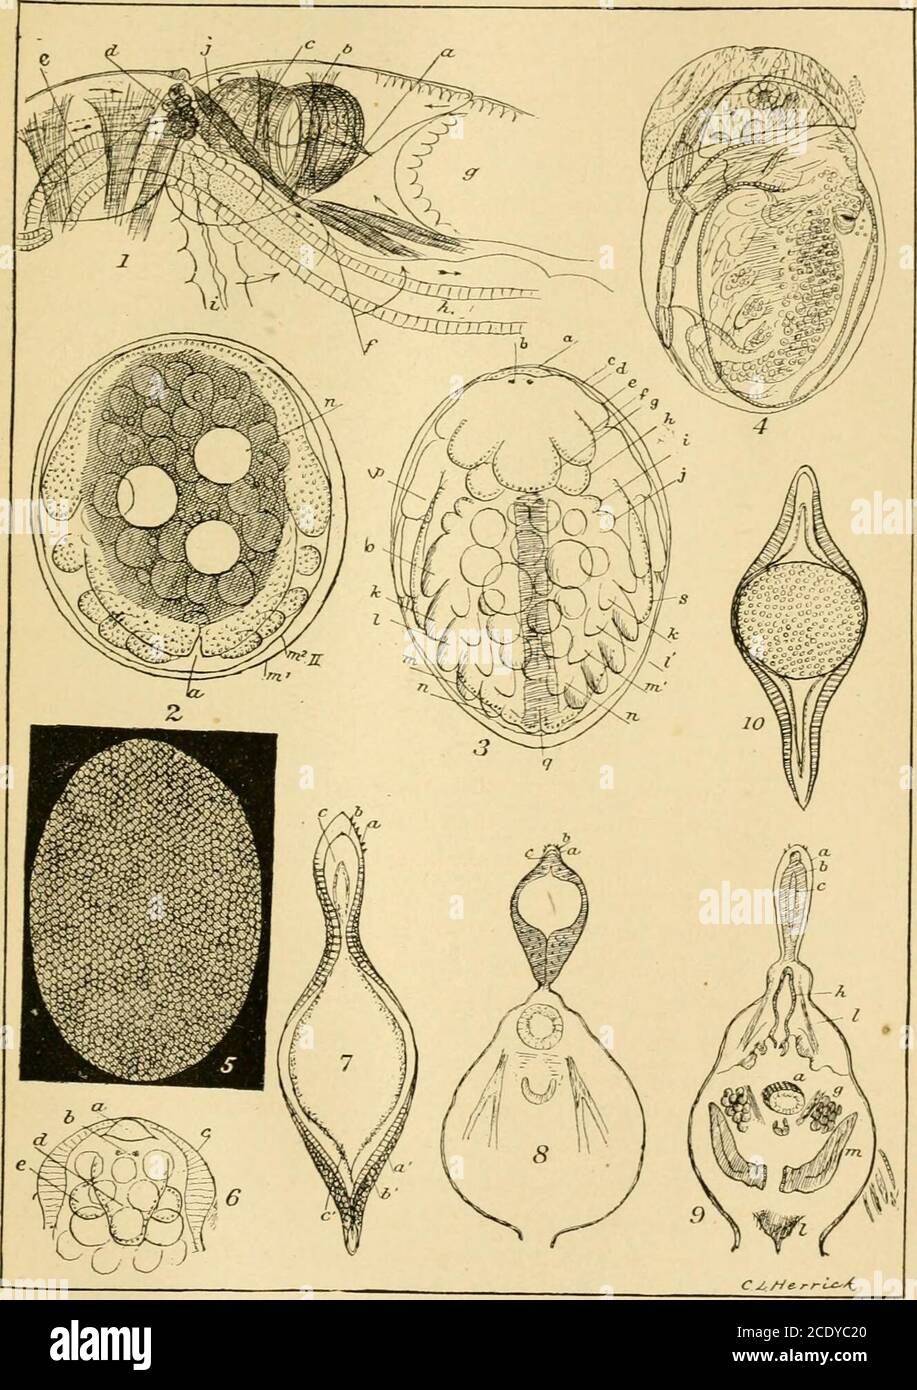 . A final report on the Crustacea of Minnesota, included in the orders Cladocera and Copepoda, together with a synopsis of the described species in North America, and keys to the known species of the more important genera . Annual R/port PLATE I. Gcol & Sat Hist Sur Minn... PLATE Q. Fiff FFFFFFFFFFFFFFFFF 1.2.3.4.5.6.7.8.9.10.11.12.13.g.l4.g. 15.g.l6.g.l7.g. 18. g g Alonella pulchella, female. reticulations. post-abdomen.Alona modesta^ male.Diaptomus similis, female. 5a. jaw. fifth foot of male. female.minnetonka, fifth foot of male. female. abdomen of female. stagnalis, margin of last thoraci Stock Photo